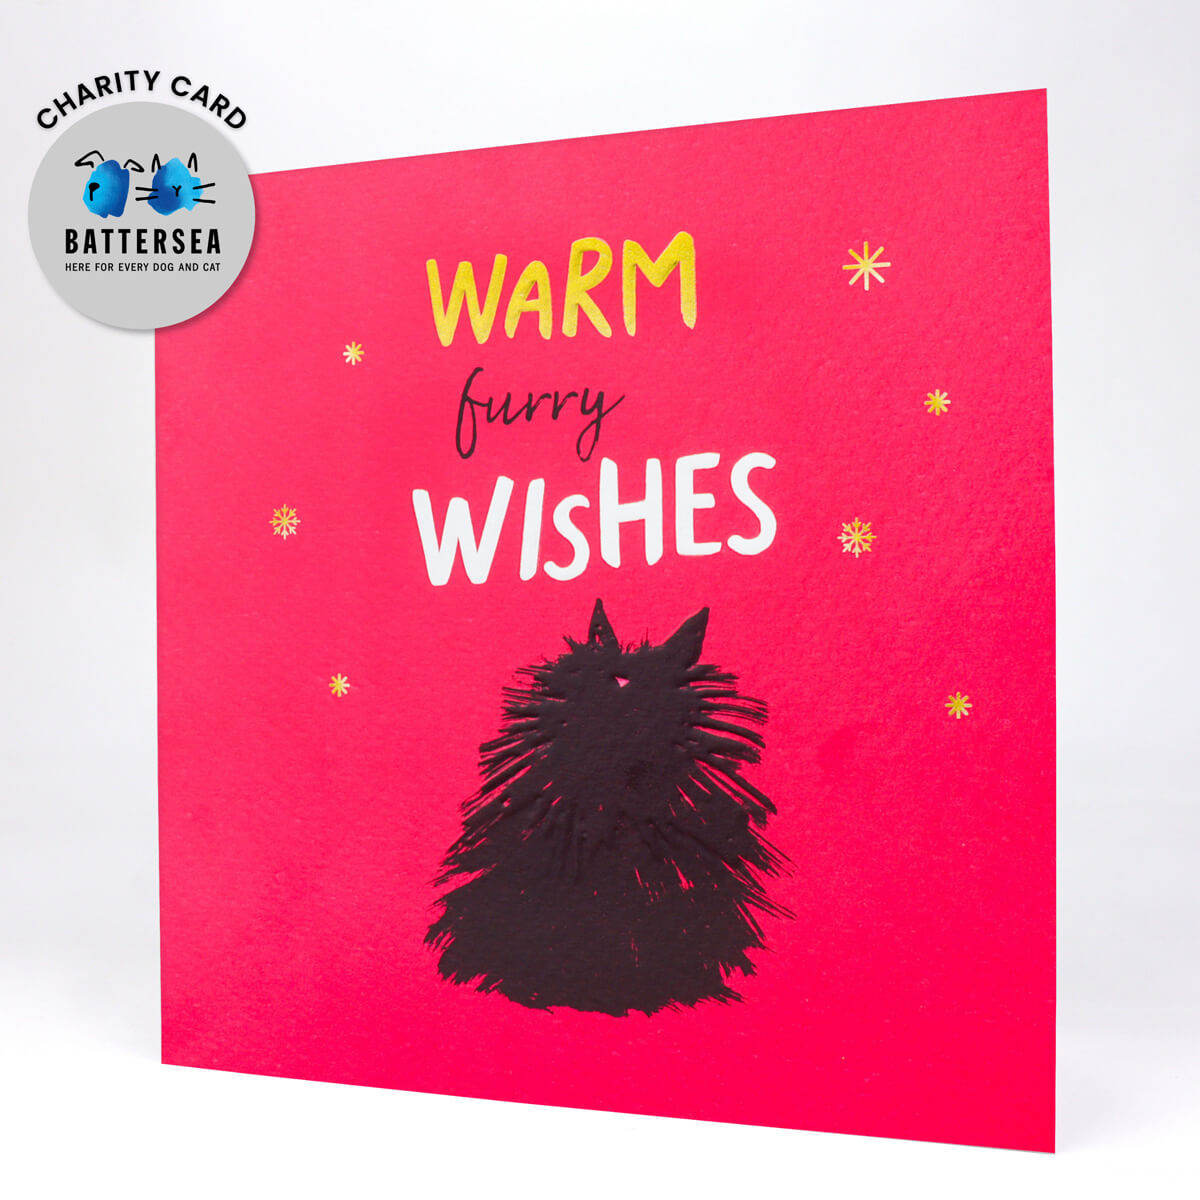 Warm Furry Wishes Cat Card